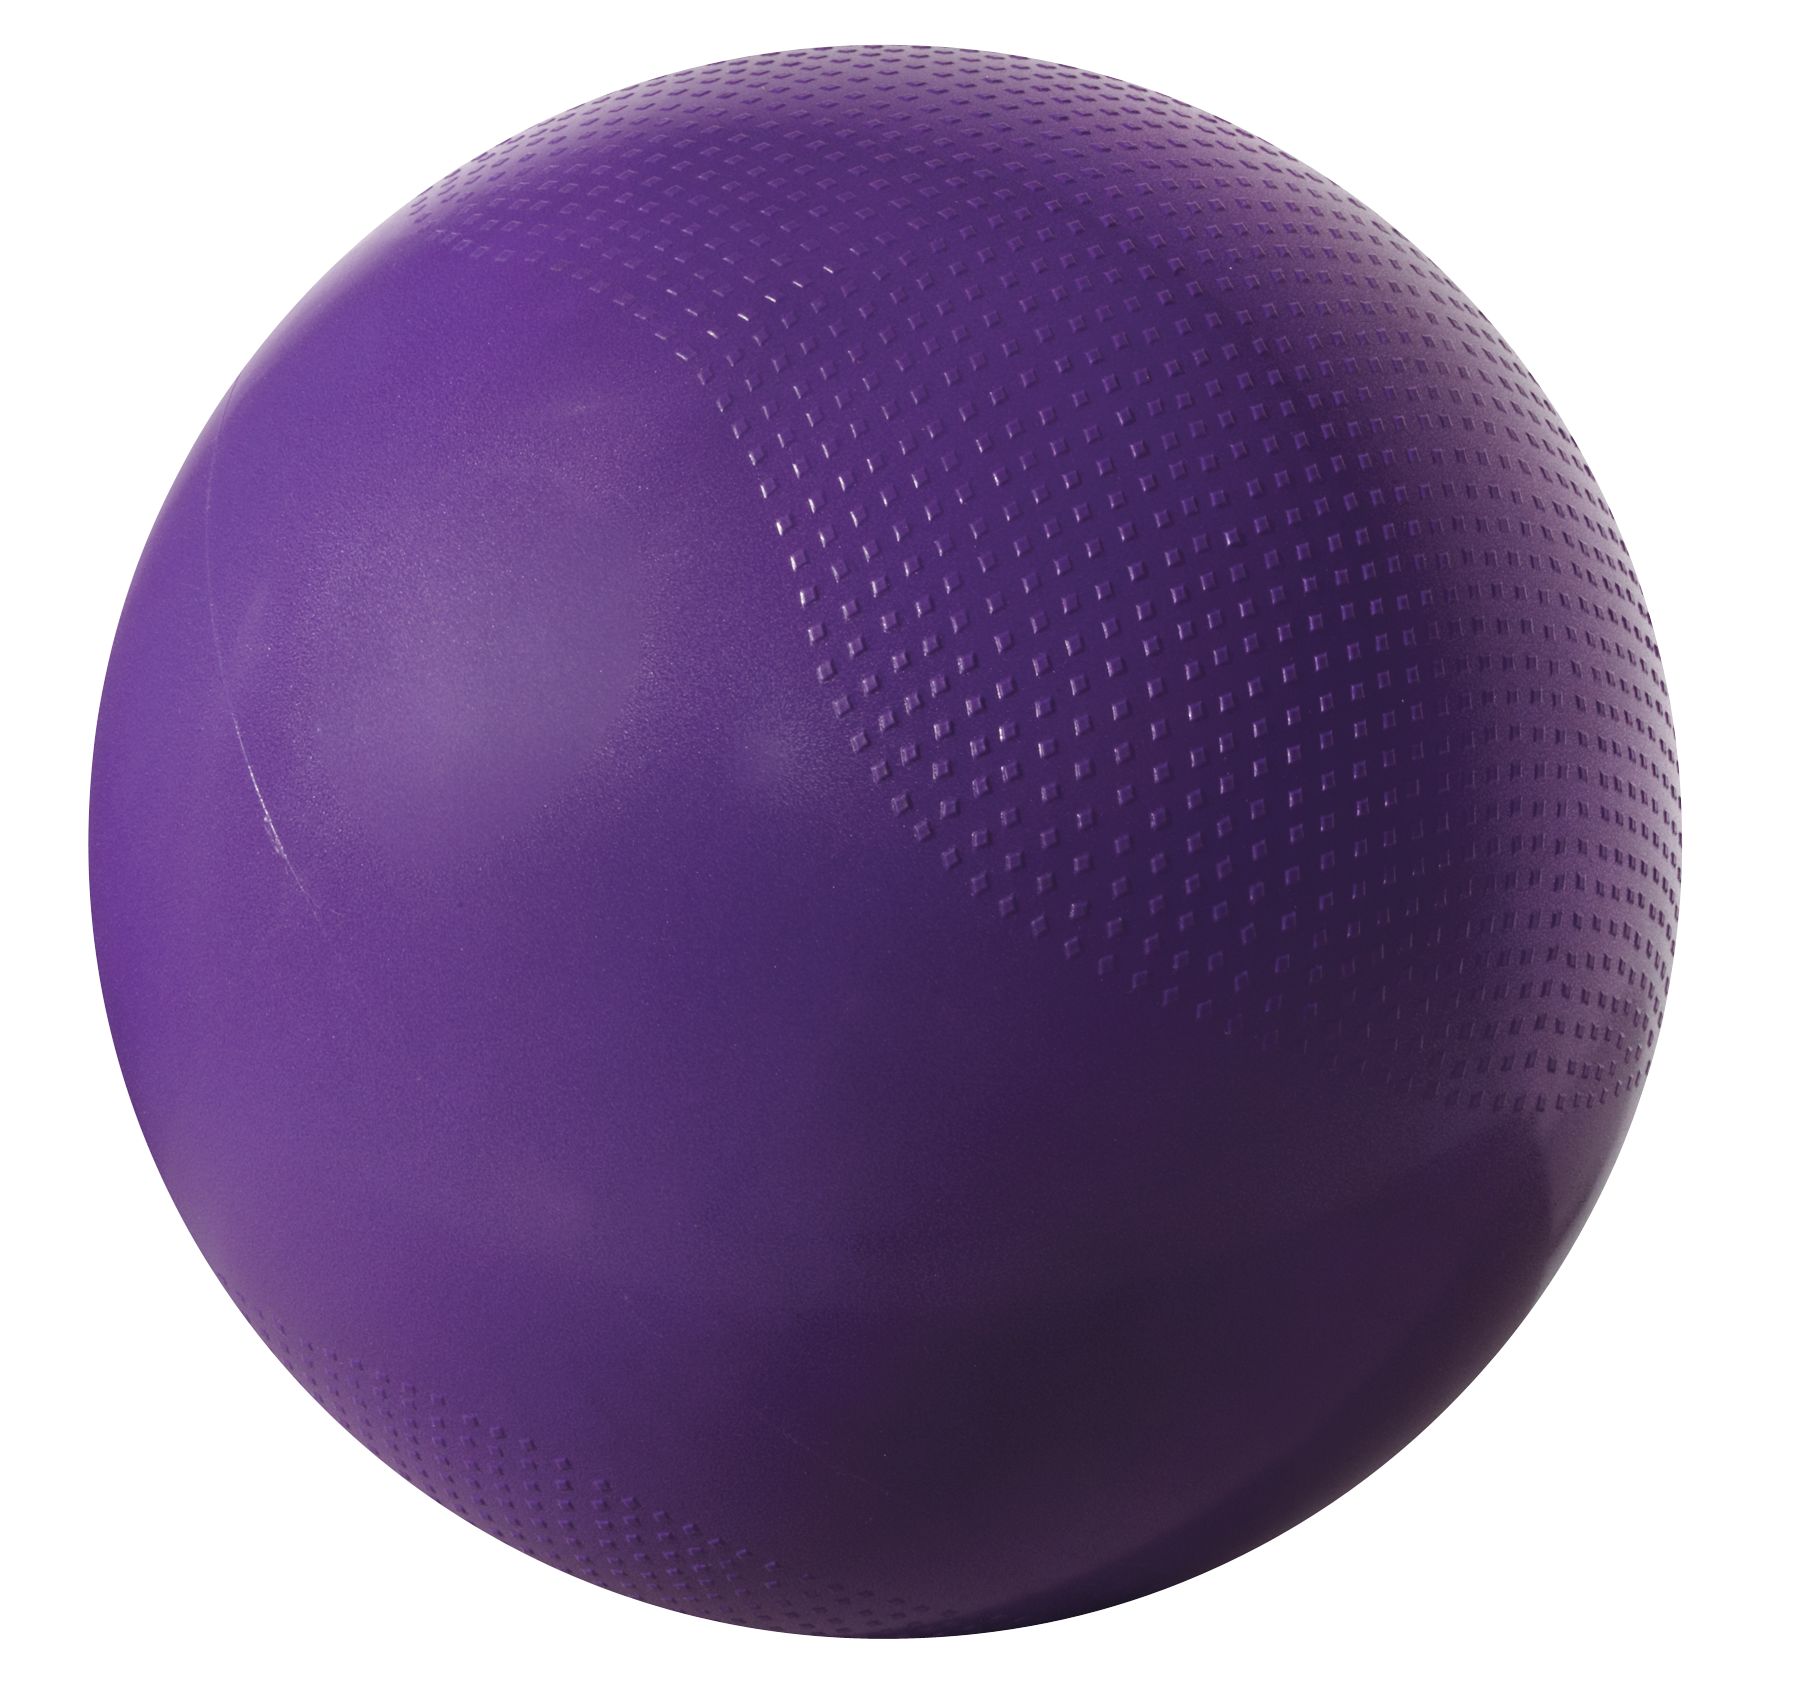 Fitness Gear 65 cm Weighted Stability Ball | DICK'S Sporting Goods